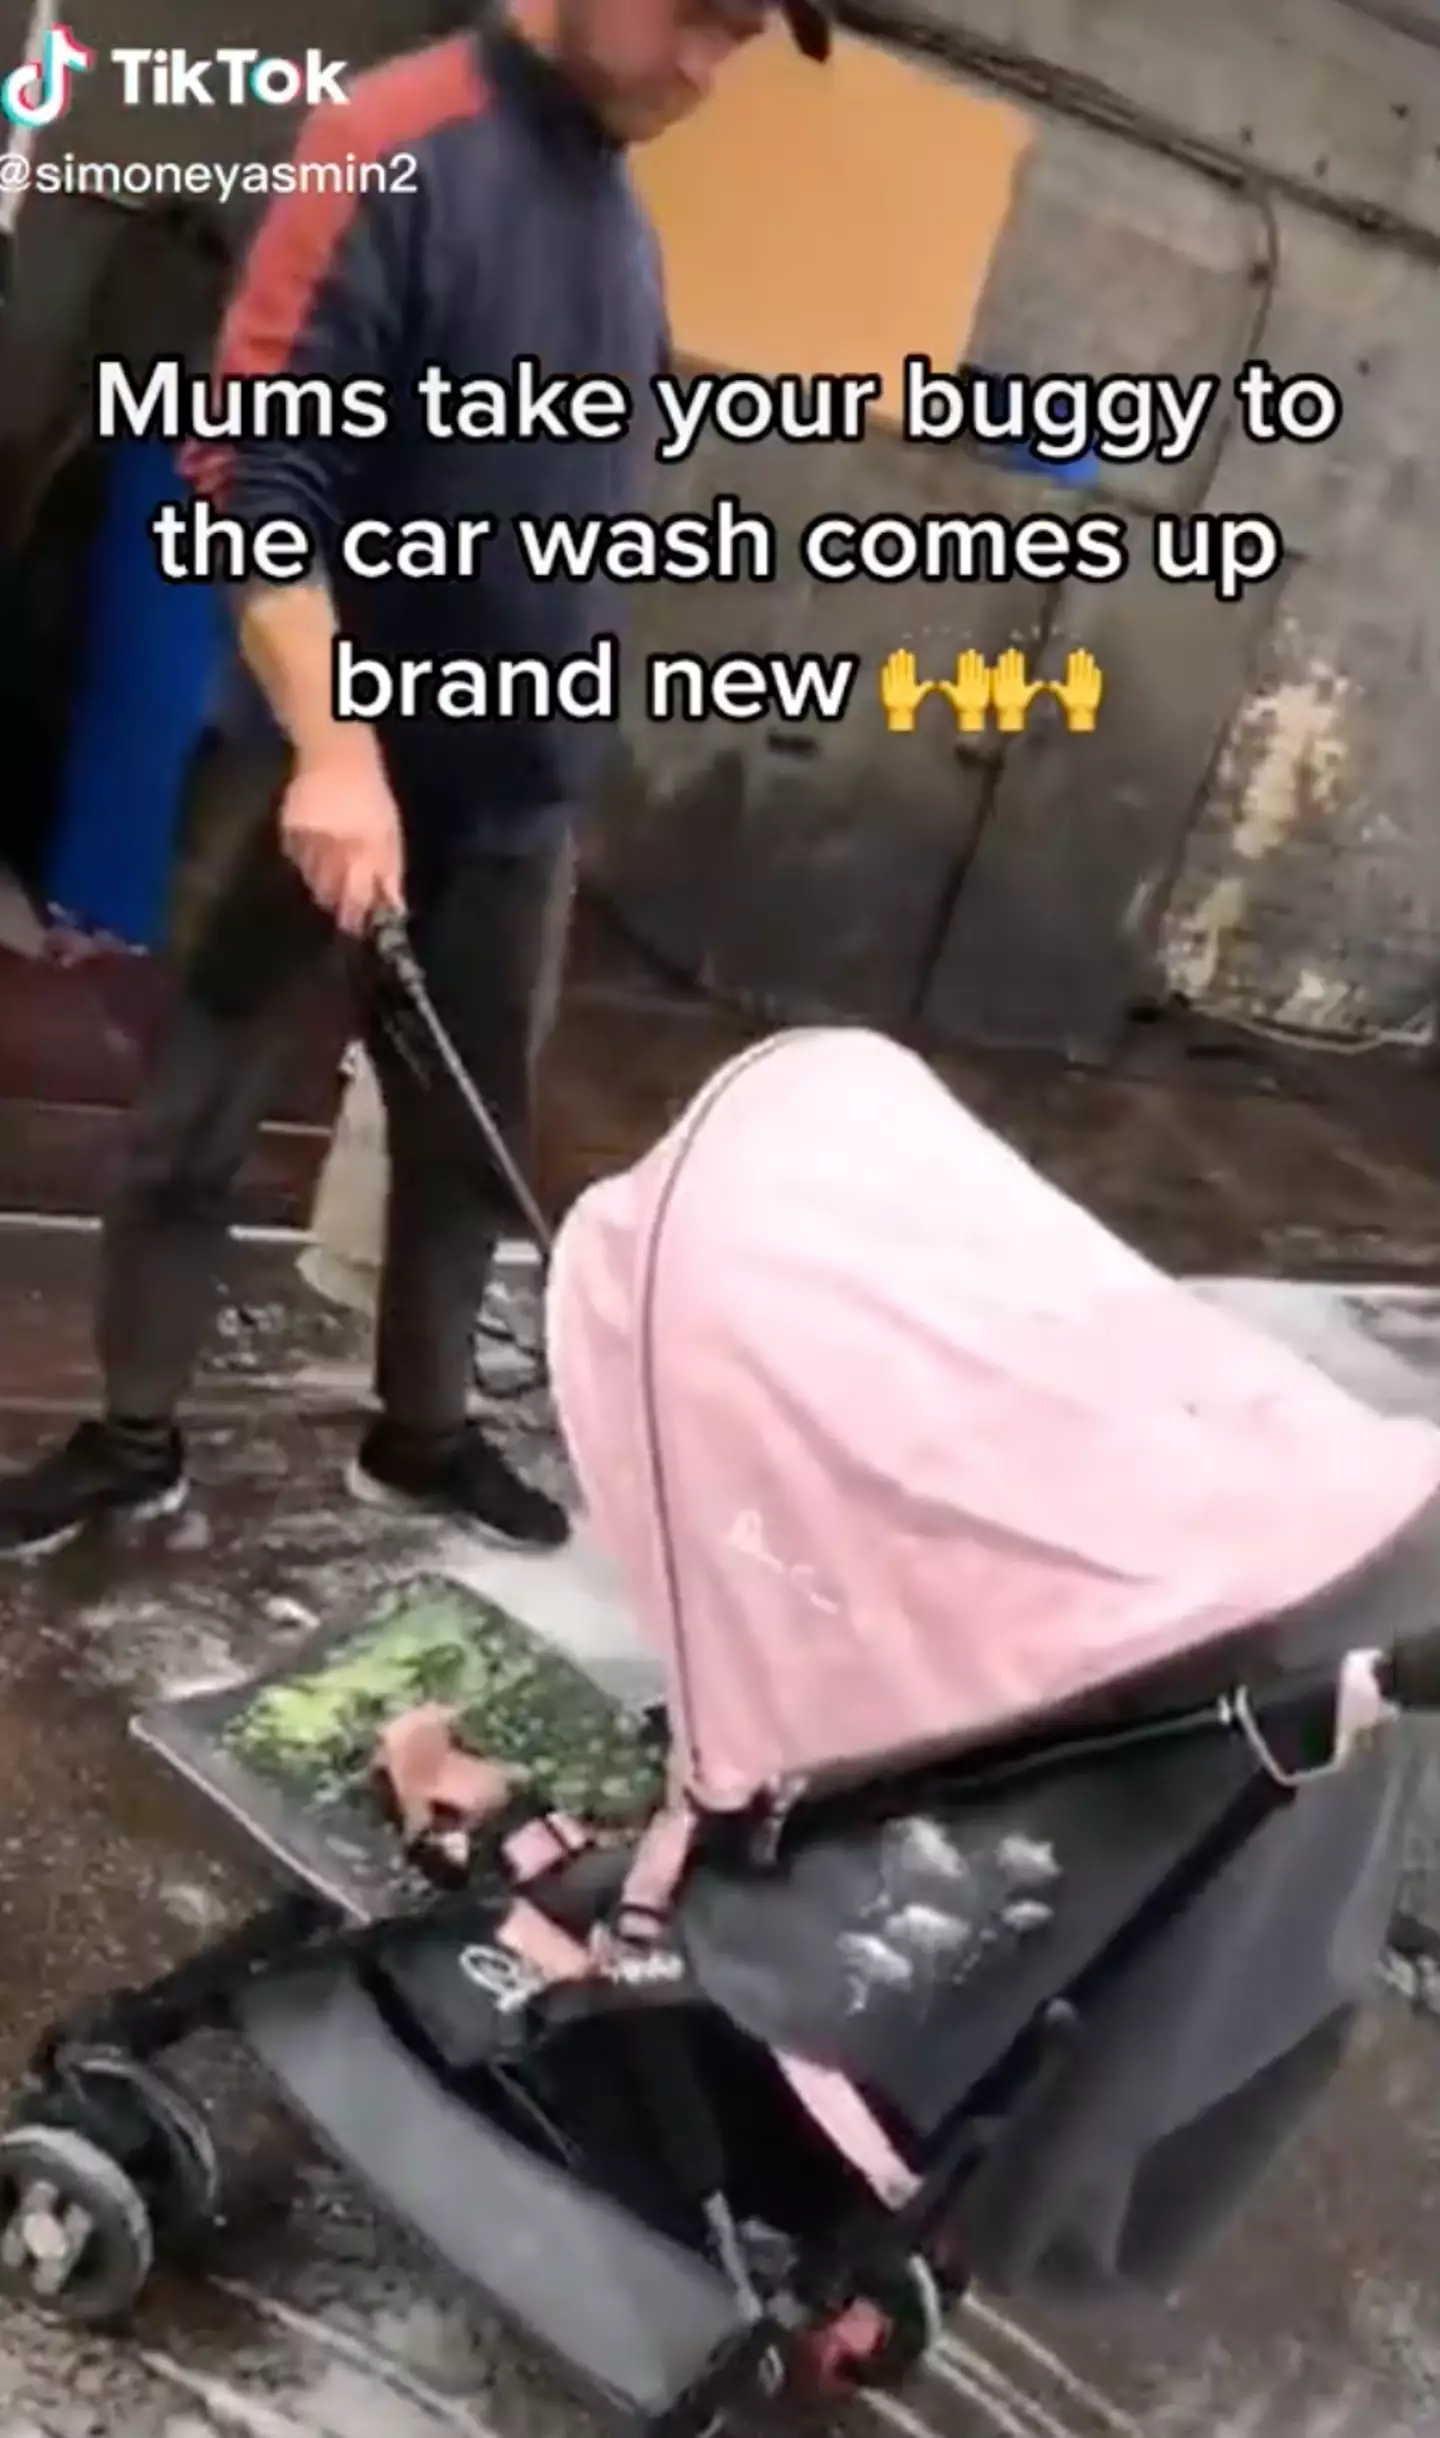 "Mums take your buggy to the car wash. Comes up brand new."